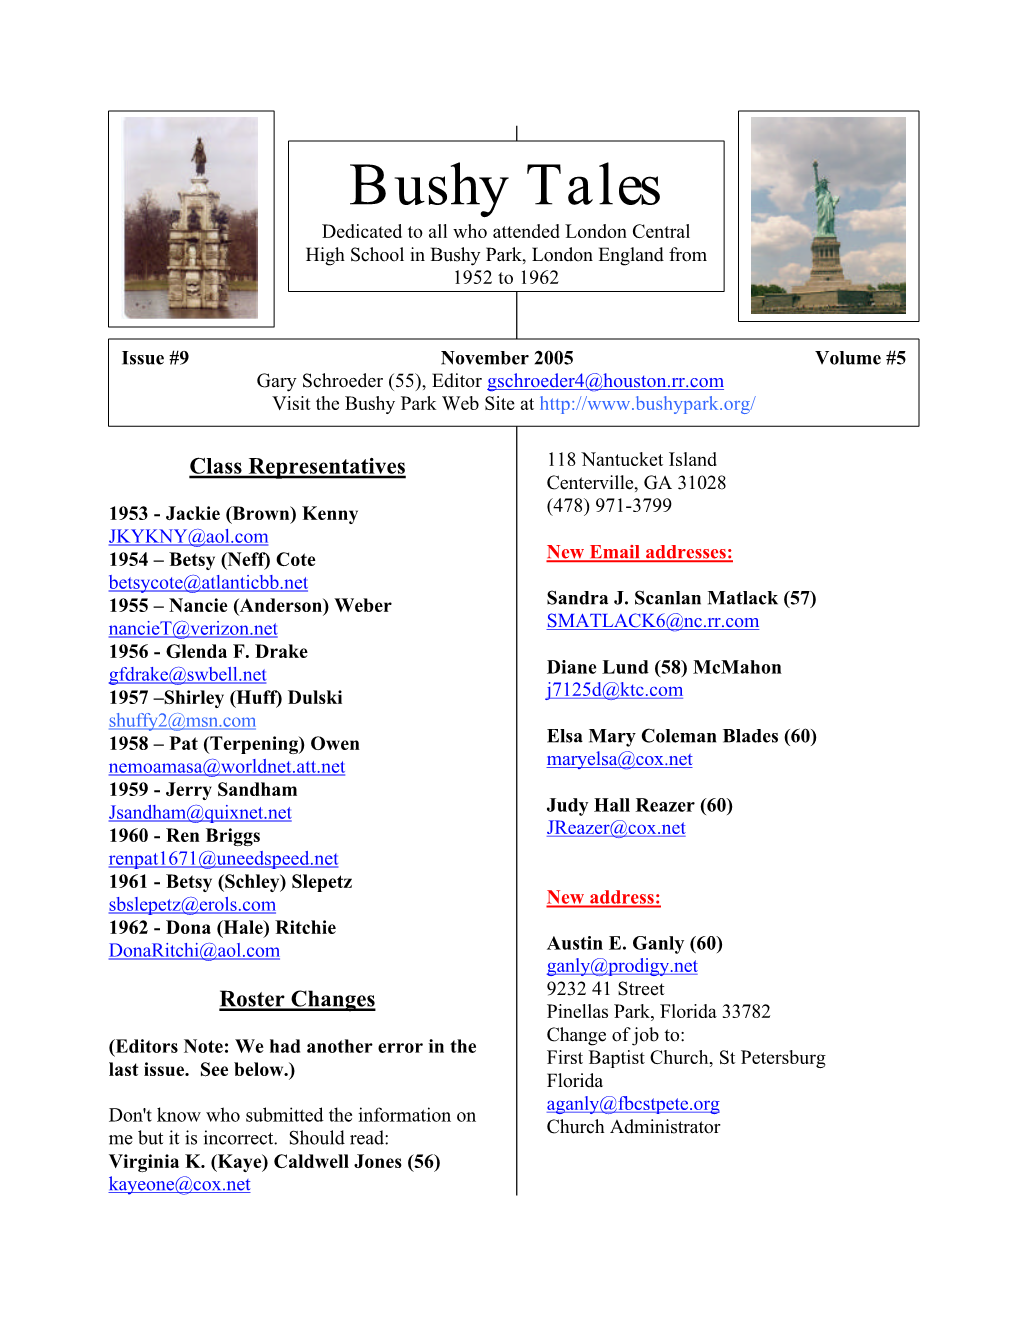 Bushy Tales Dedicated to All Who Attended London Central High School in Bushy Park, London England from 1952 to 1962